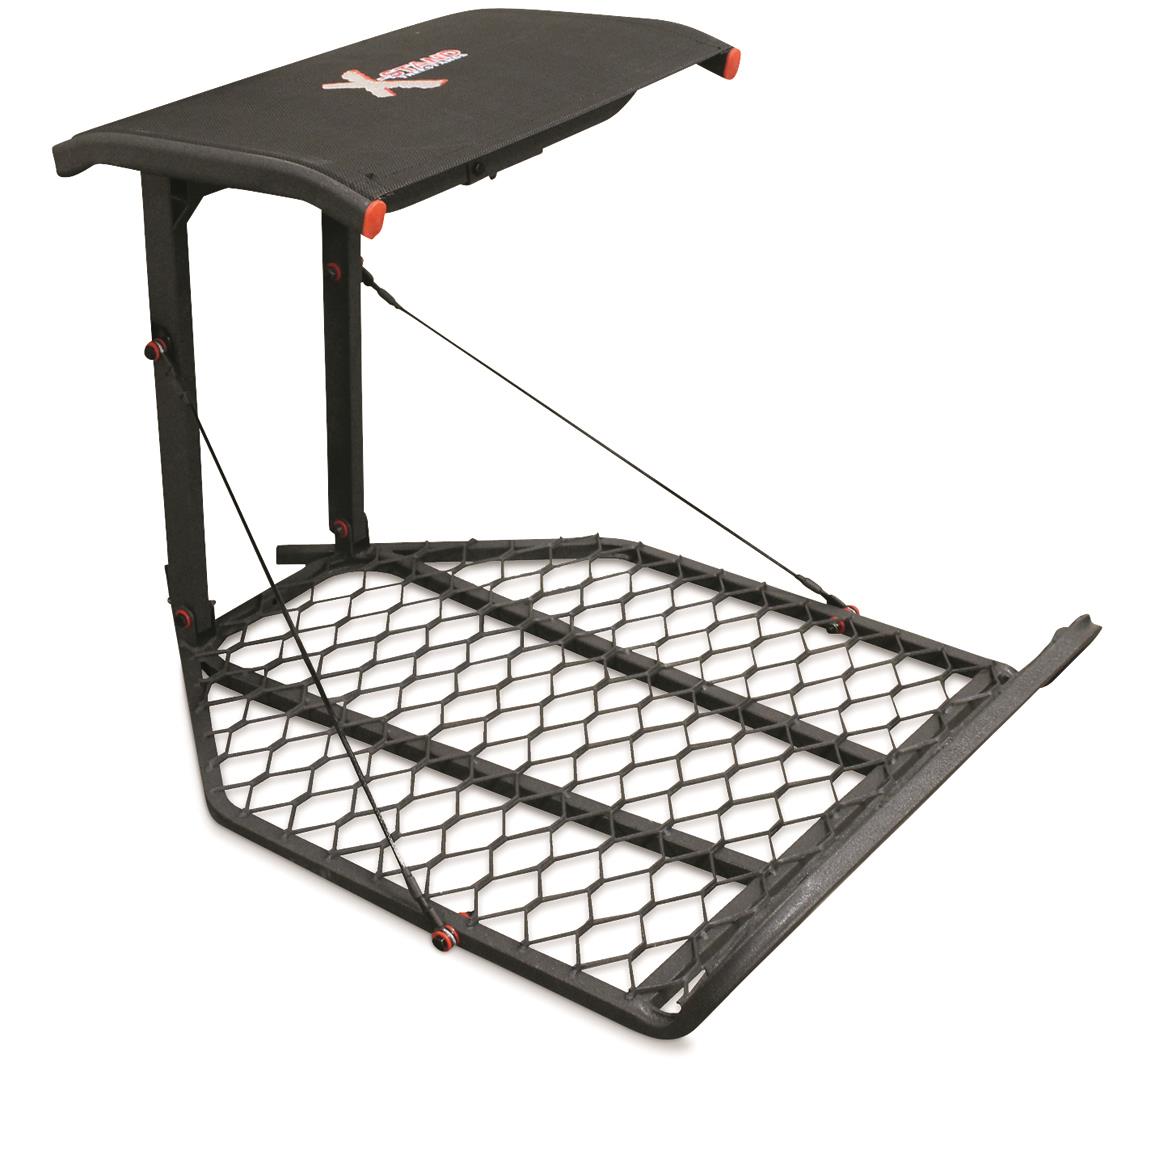 X-Stand Champ 2.0 Hang-on Tree Stand